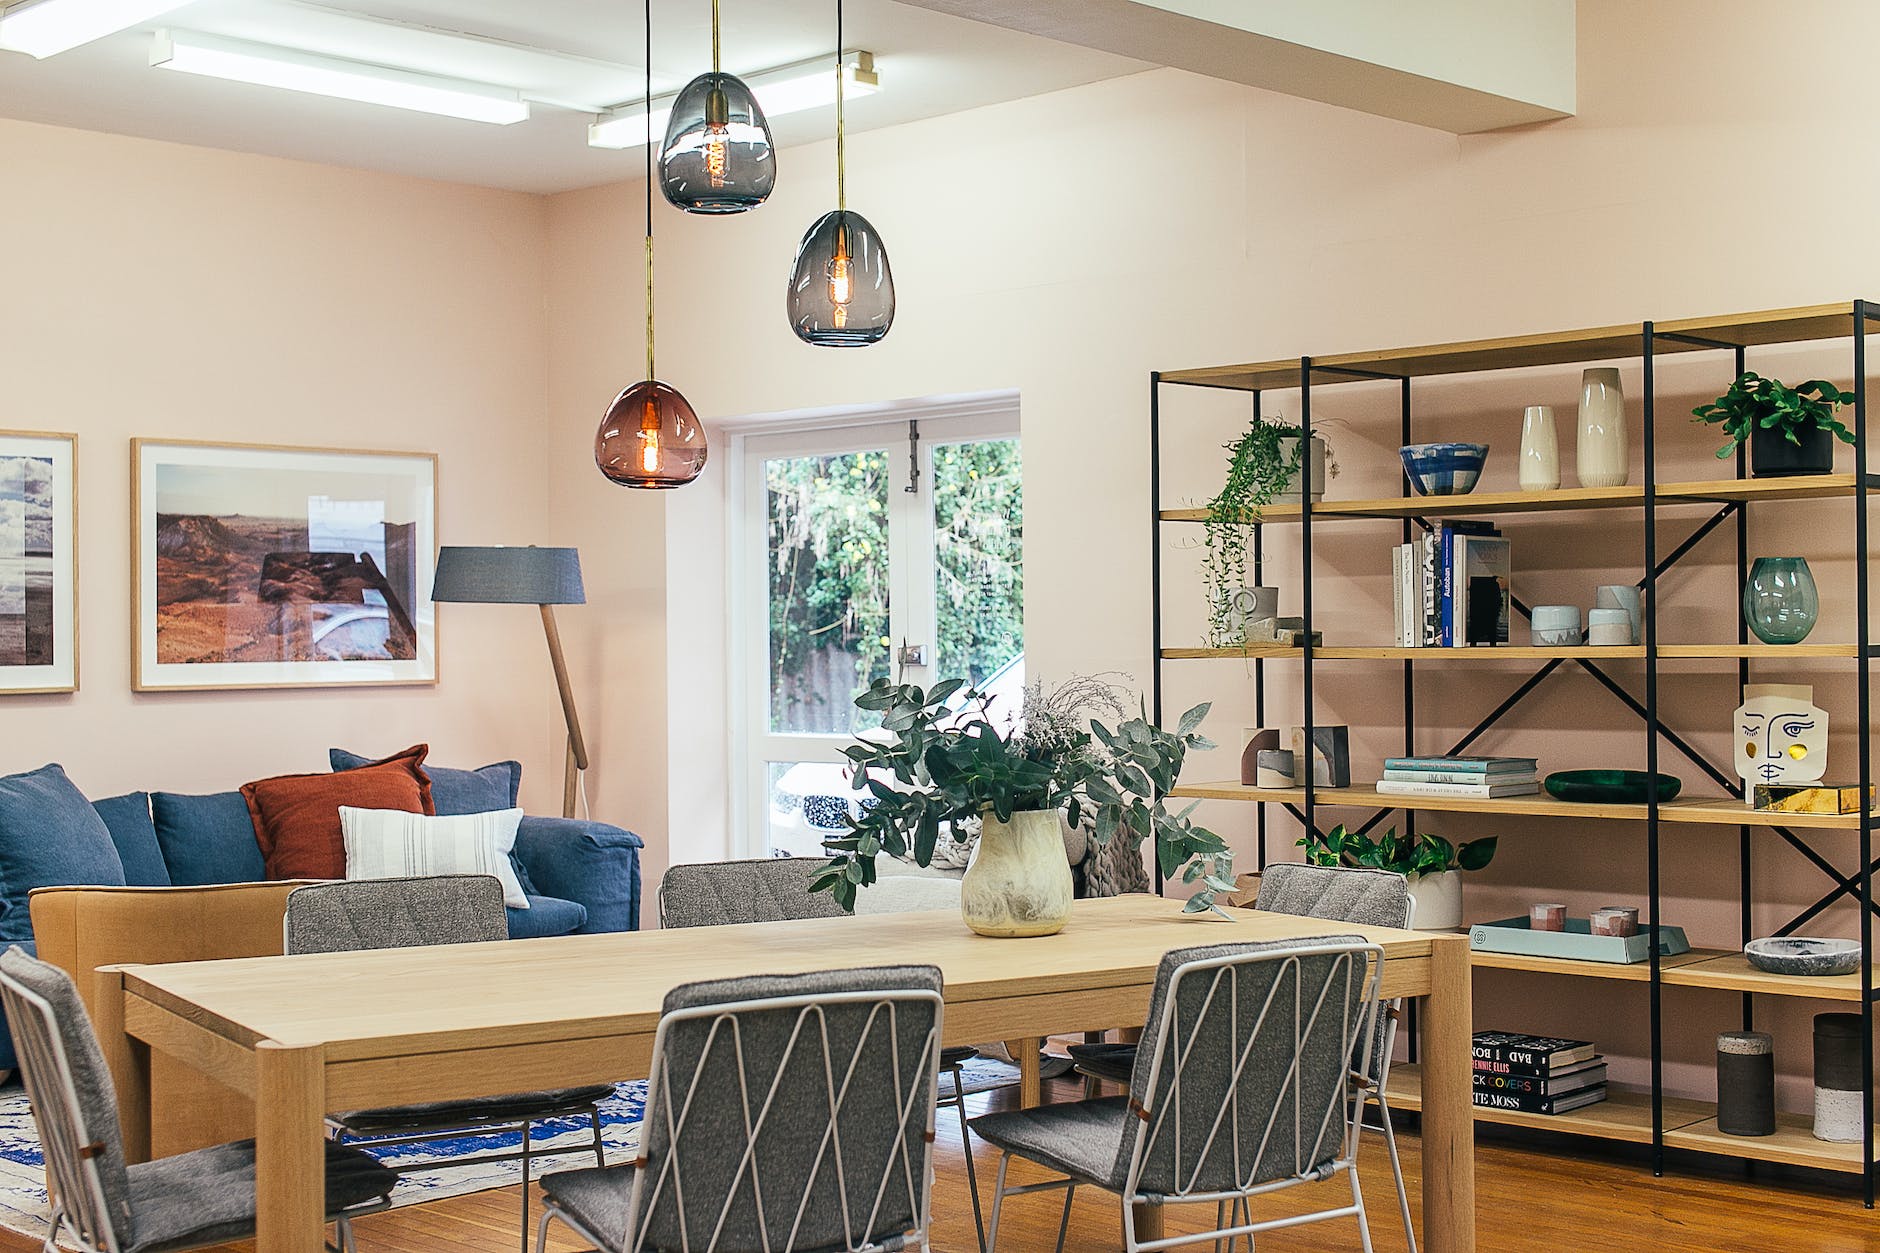 Key Benefits of Having Your Own Private Office Within a Co-working Space